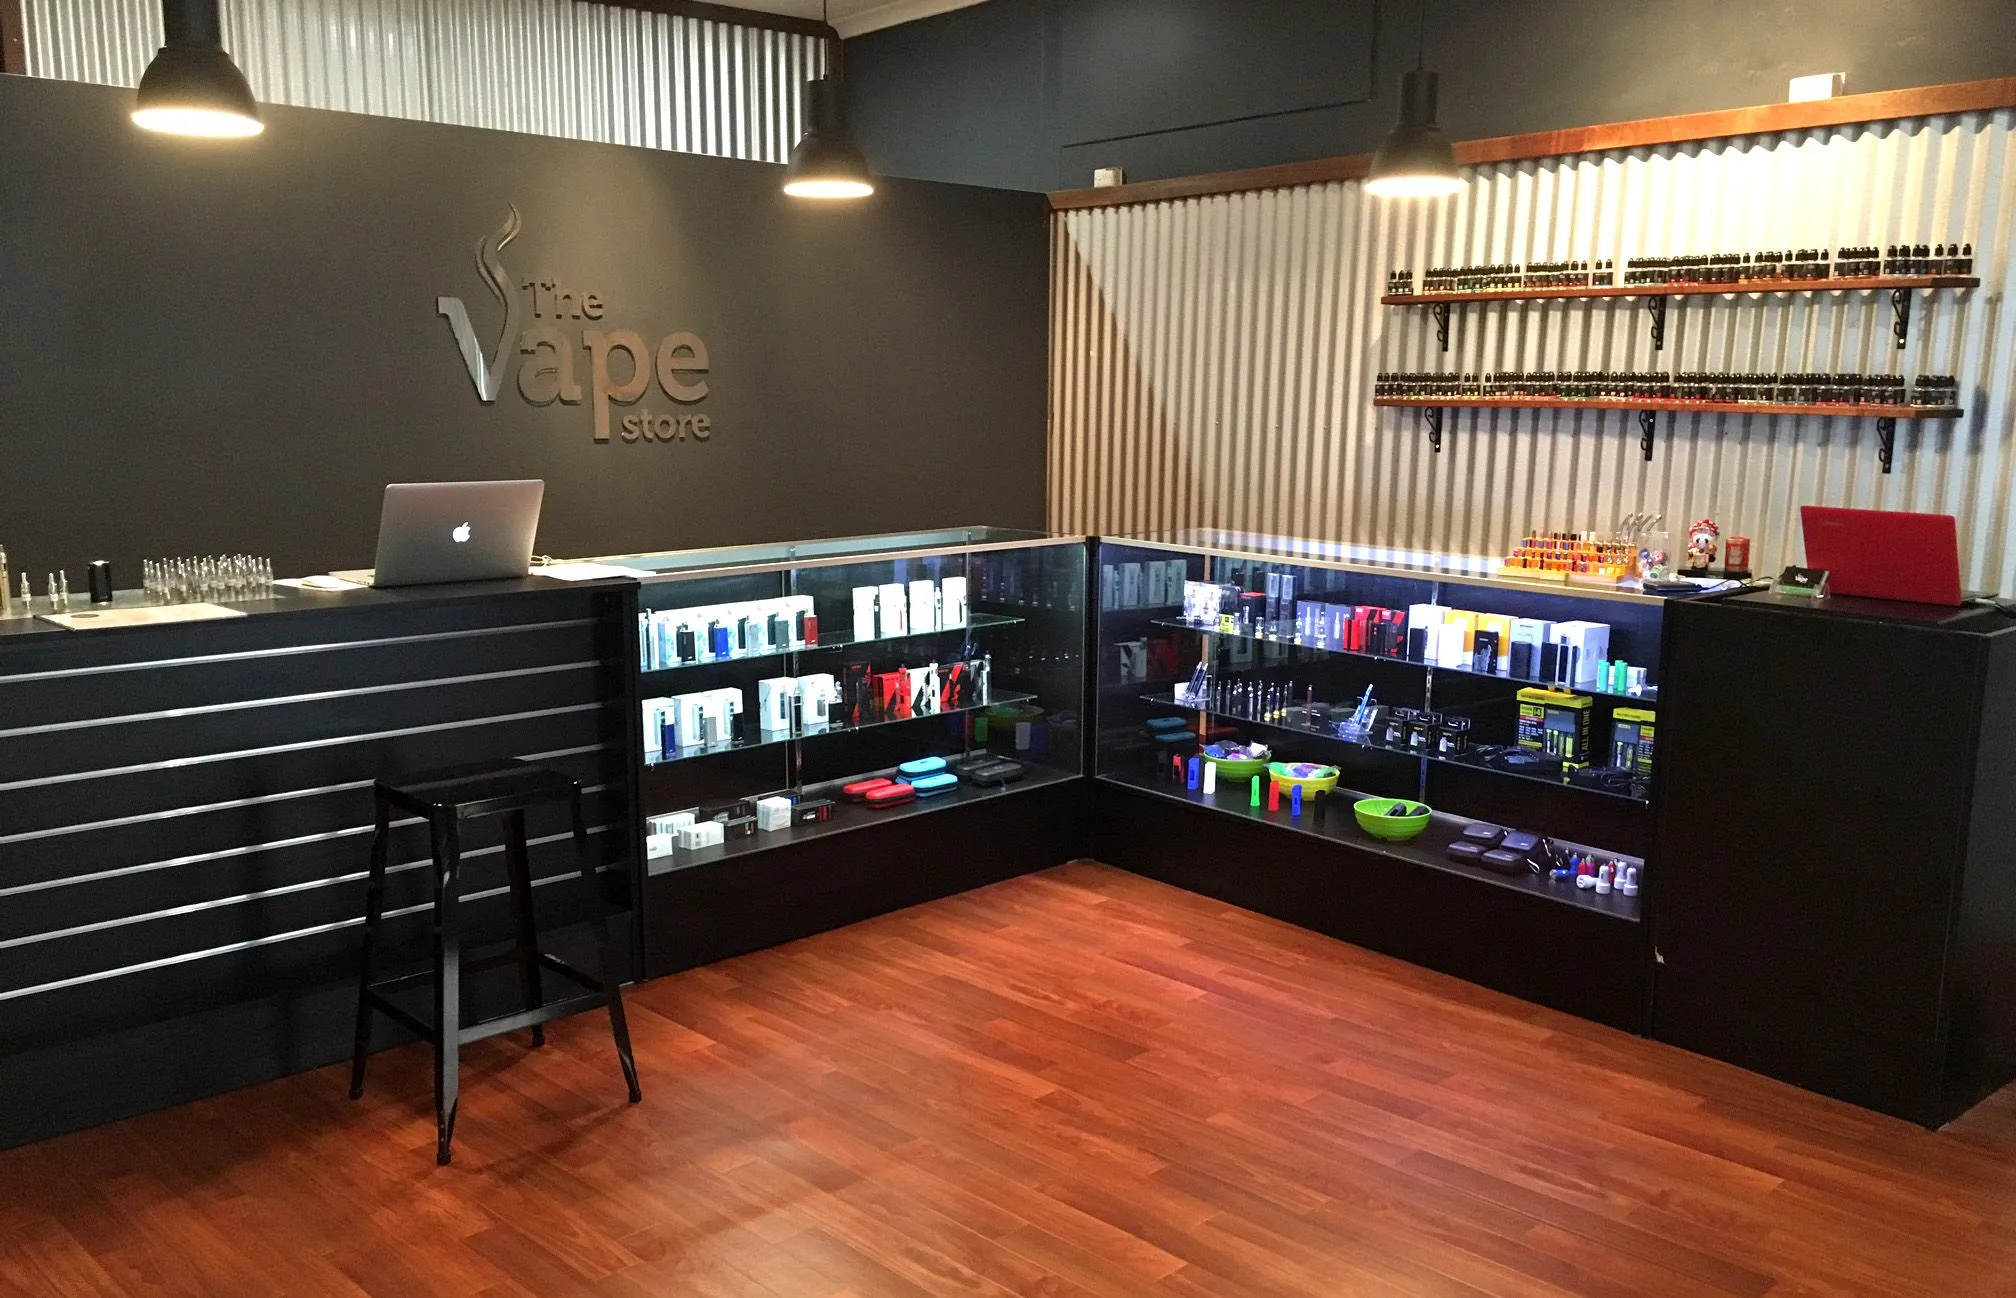 E-cigaretts Shopping - showcases with products related to electronic cigarettes